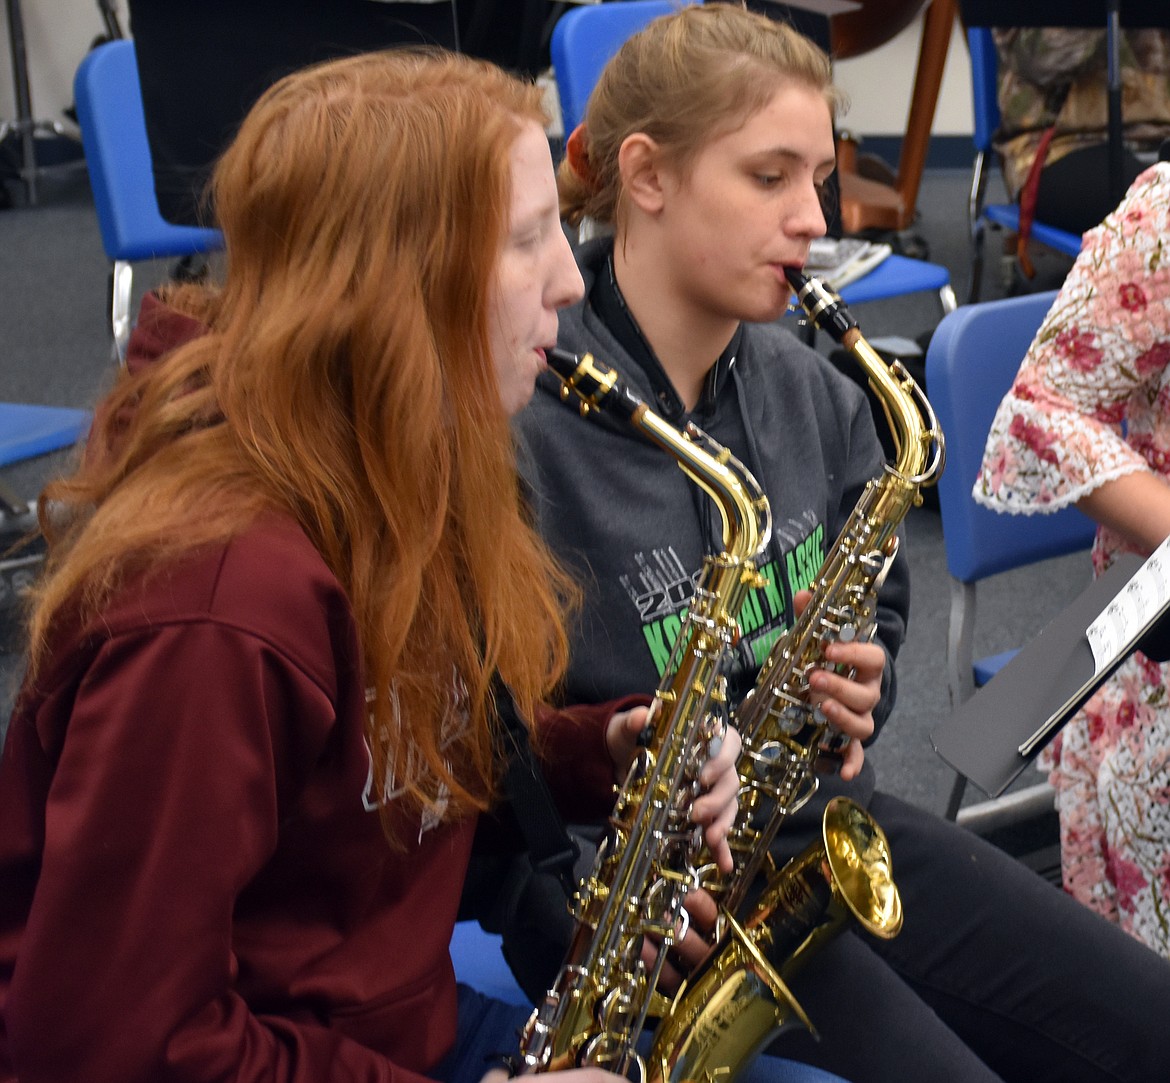 The Libby High School Band, along with the high school choir, will perform a free concert in advance of the district festival competition in April. (Duncan Adams/The Western News)